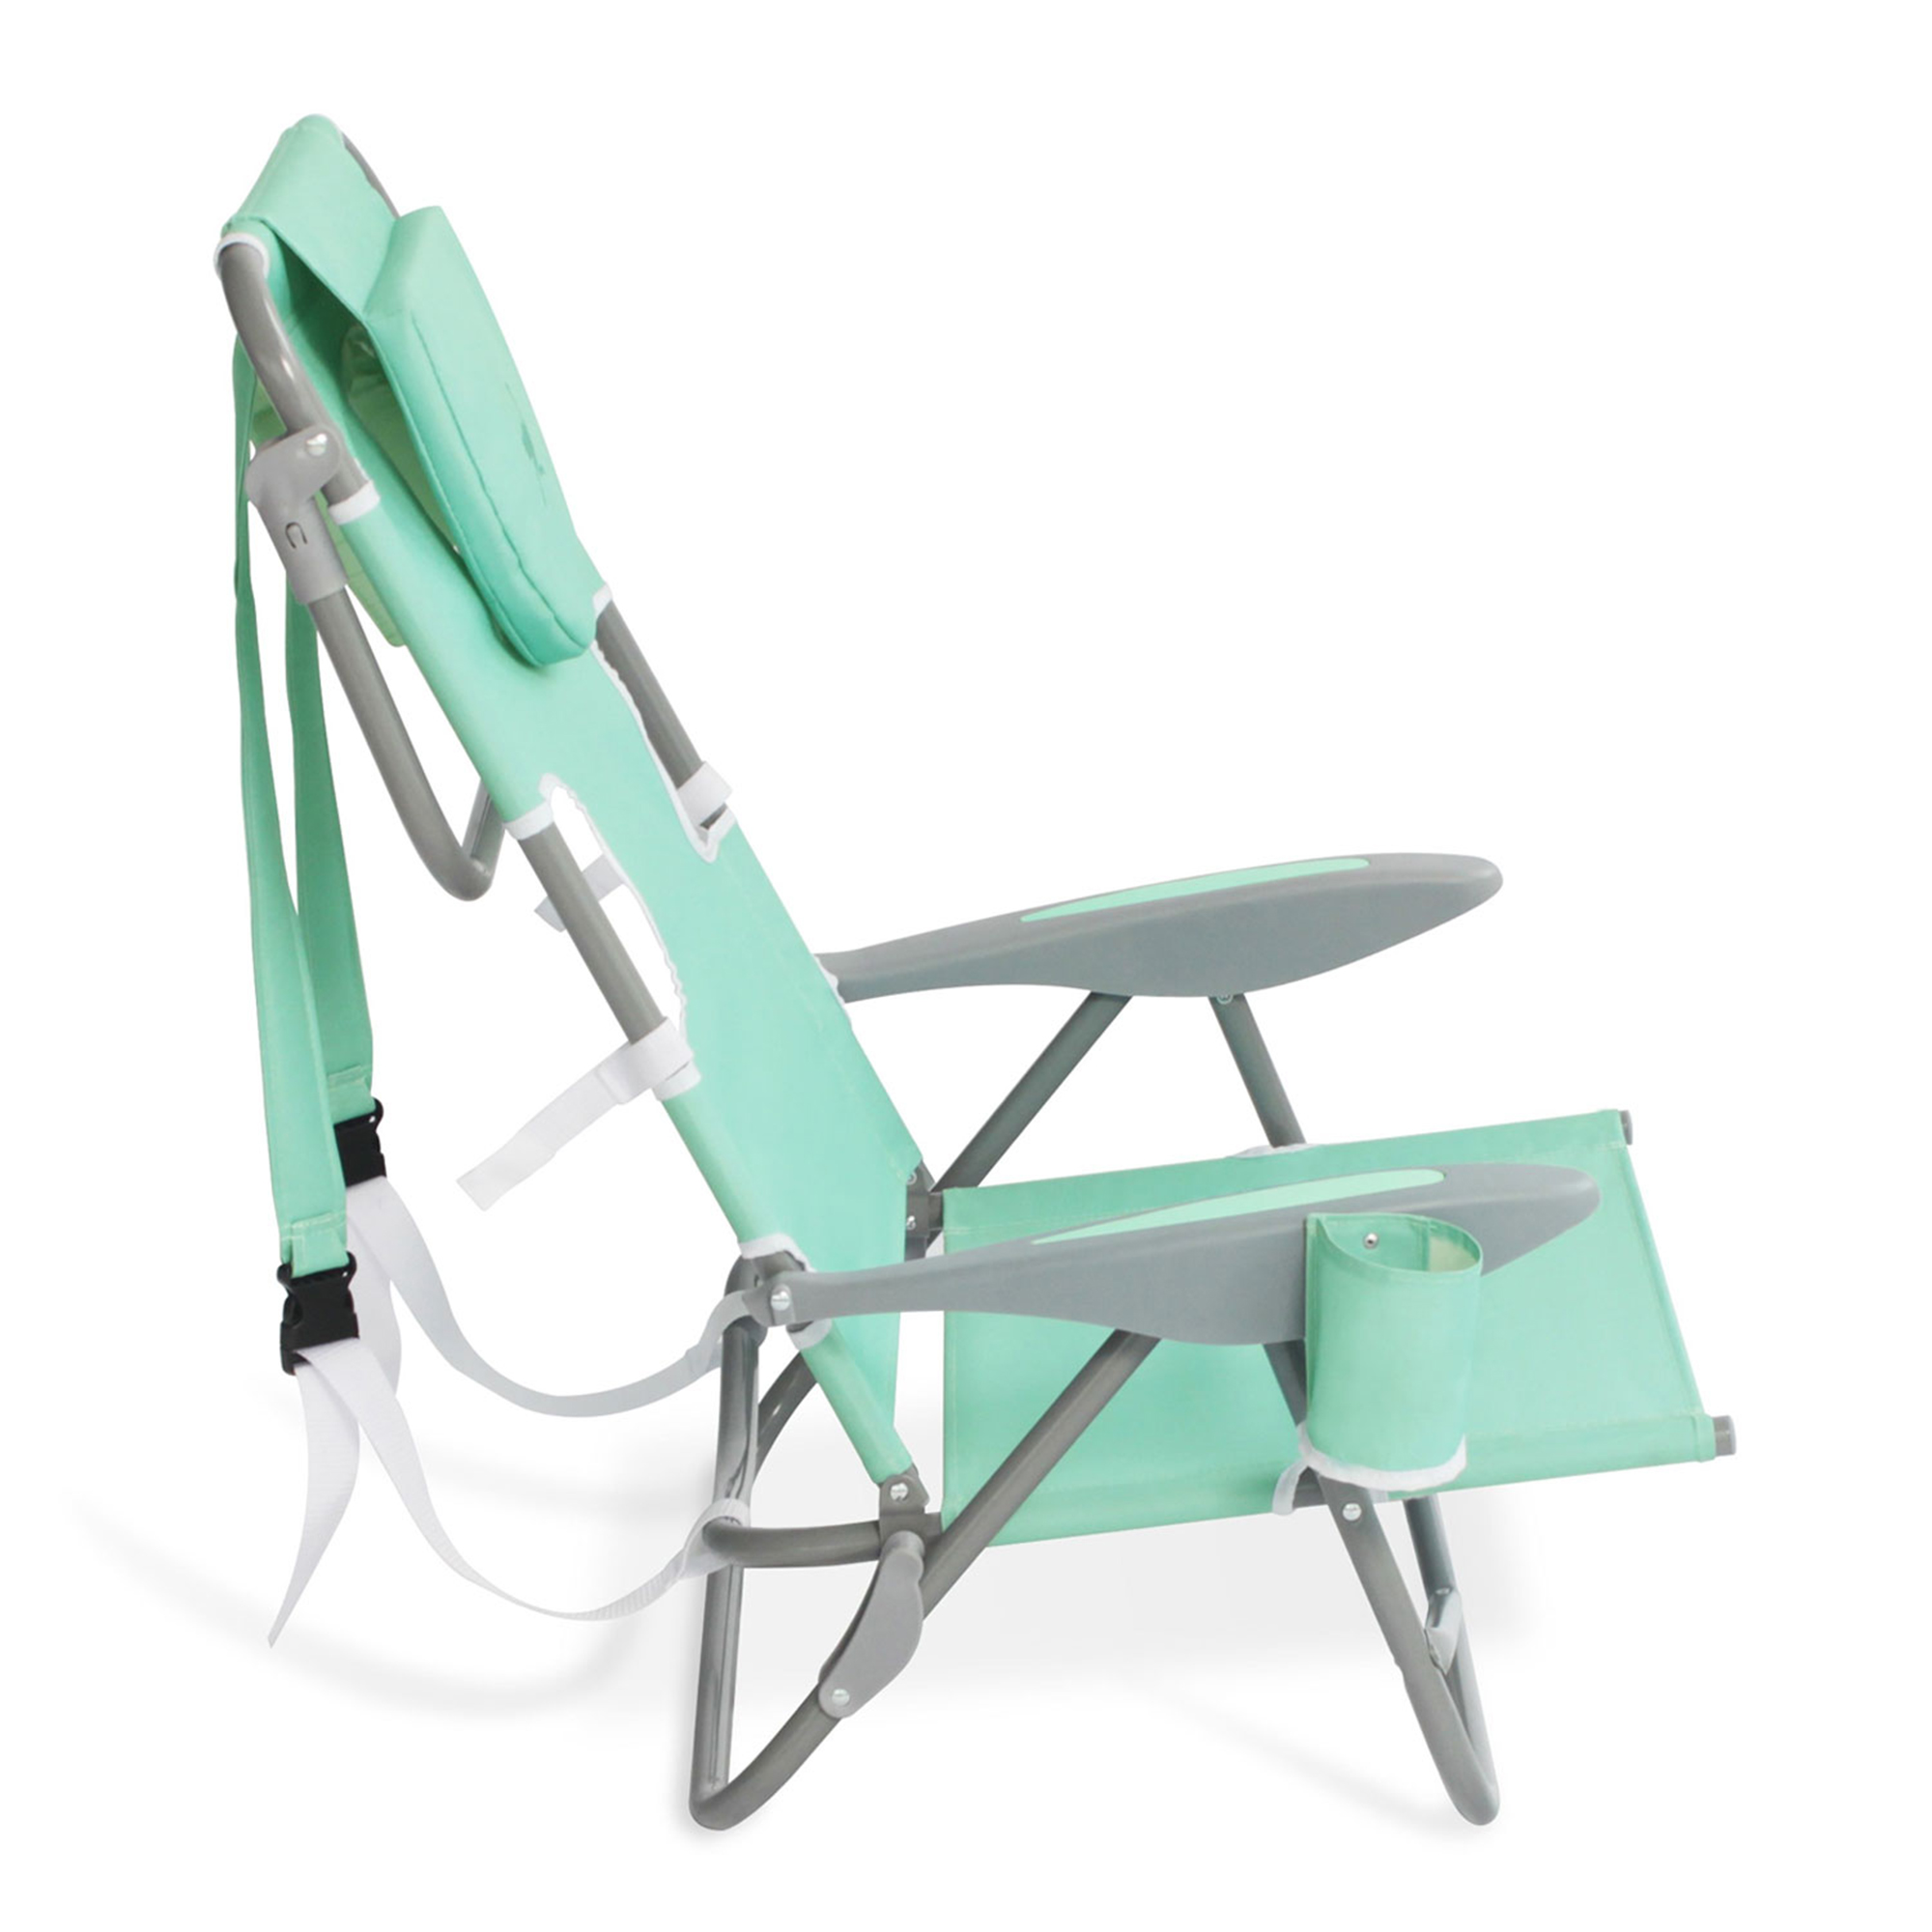 Ostrich On-Your-Back Outdoor Reclining Beach Pool Camping Chair, Teal - image 10 of 12